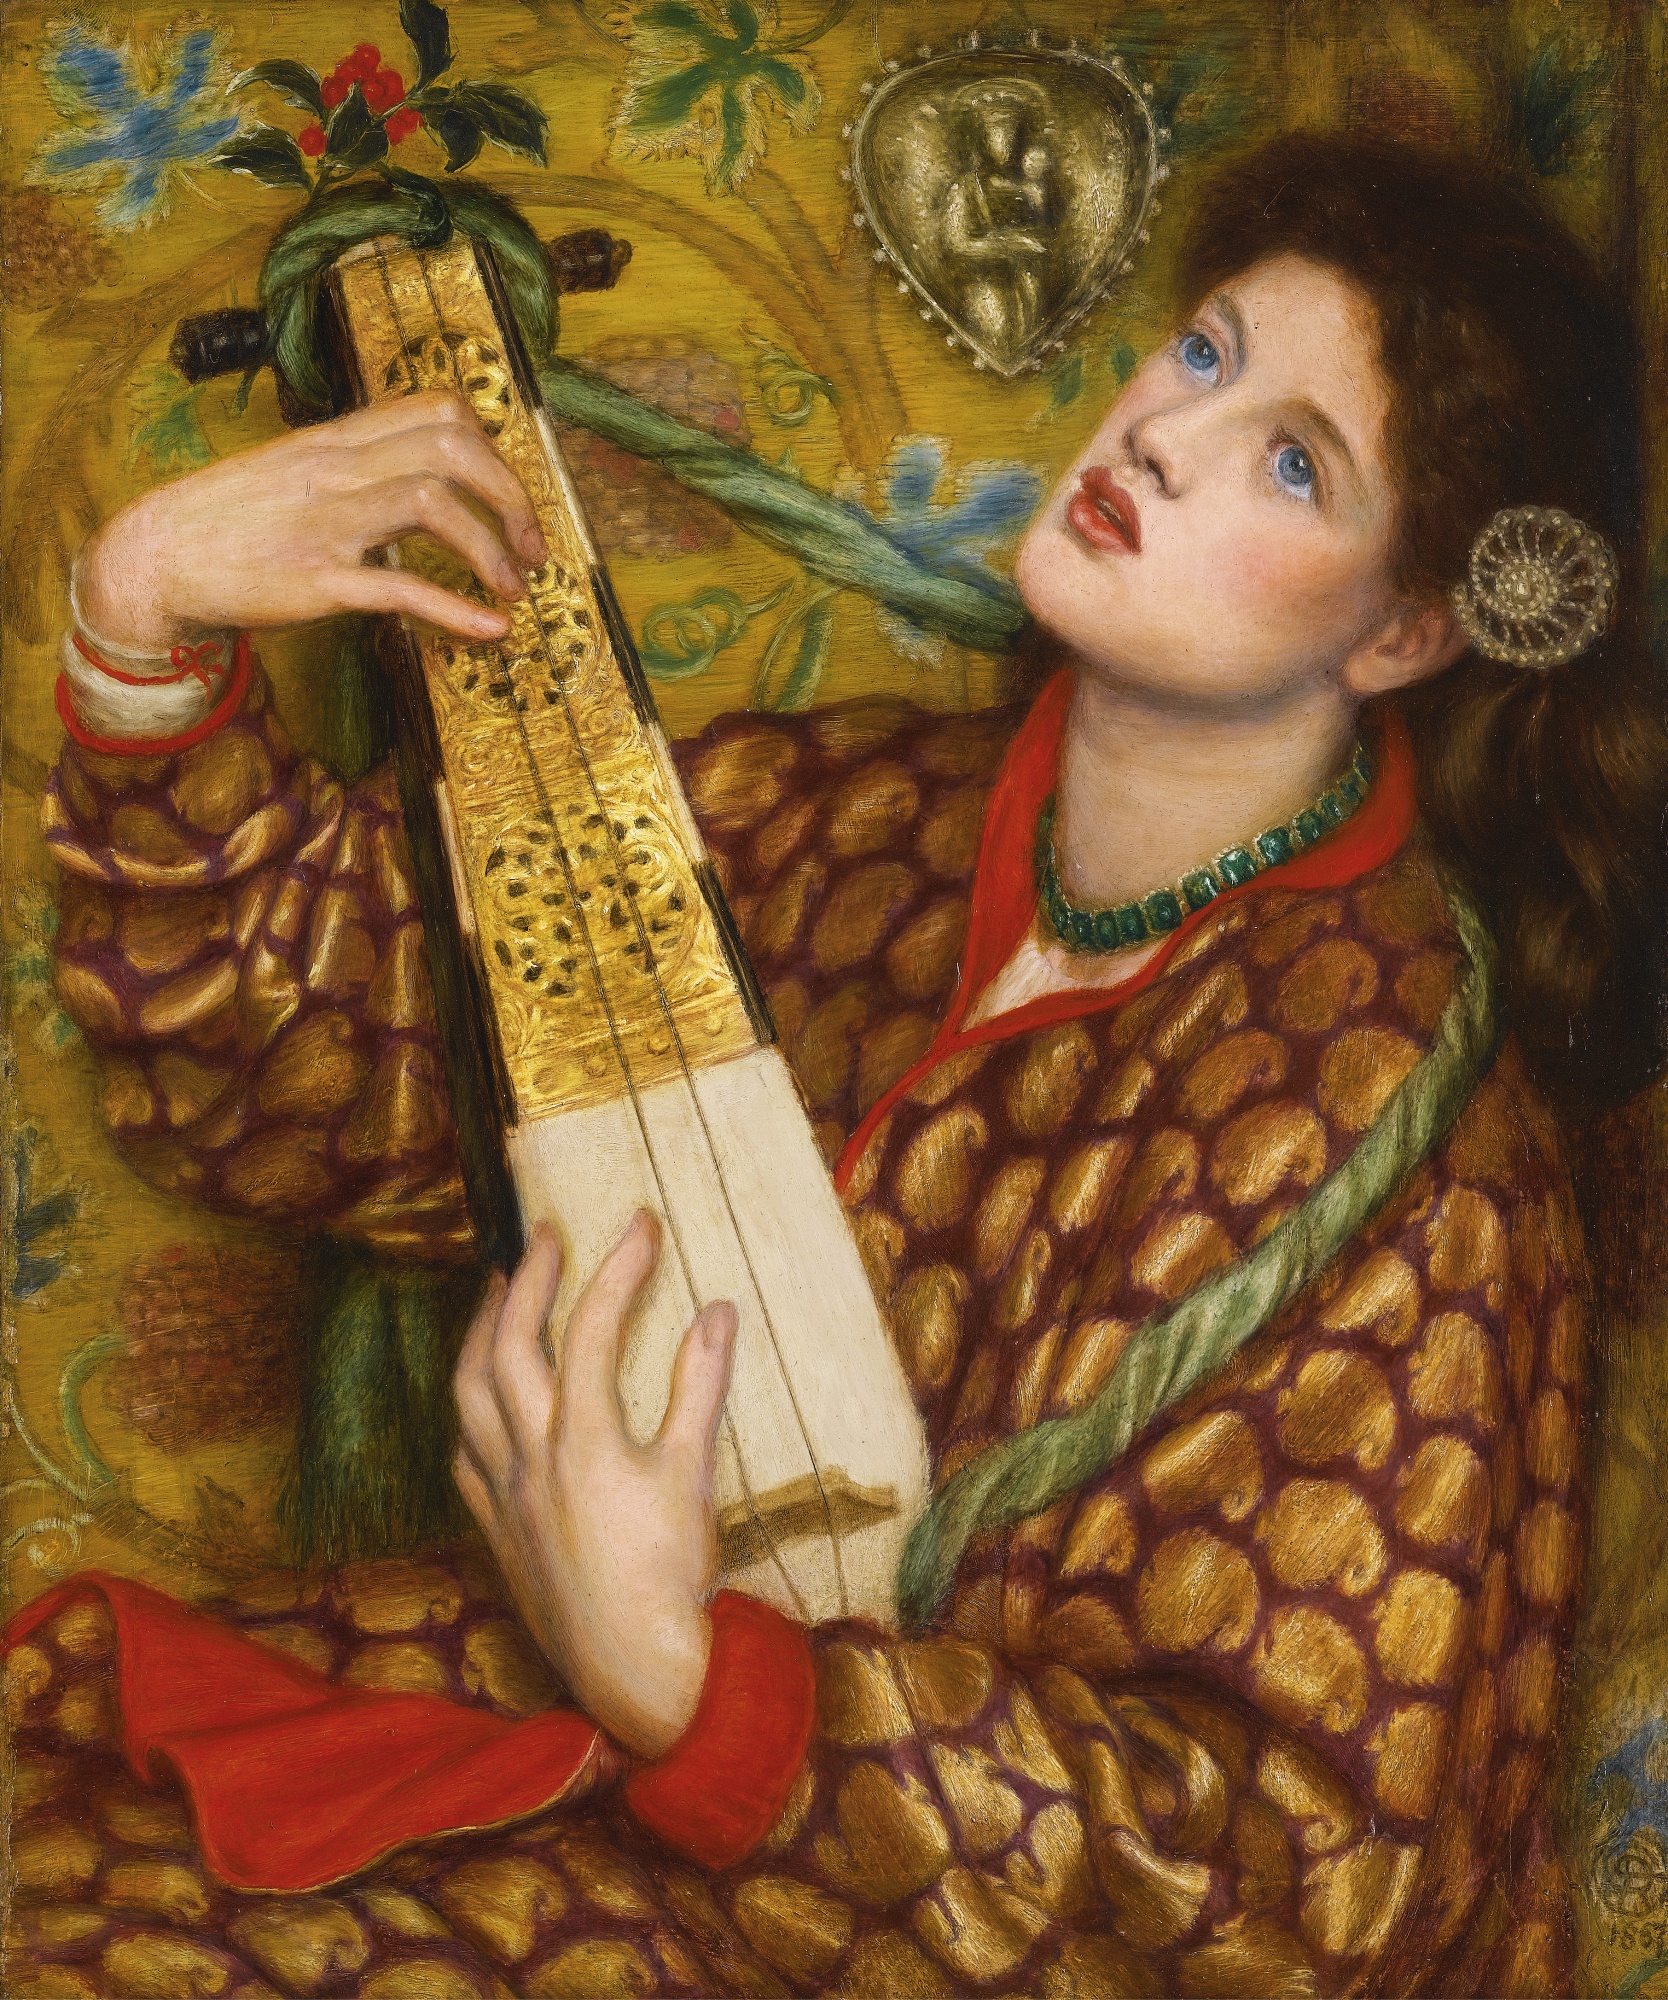 A Christmas Carol by Dante Gabriel Rossetti - 1867 - 45.5 x 38 cm private collection